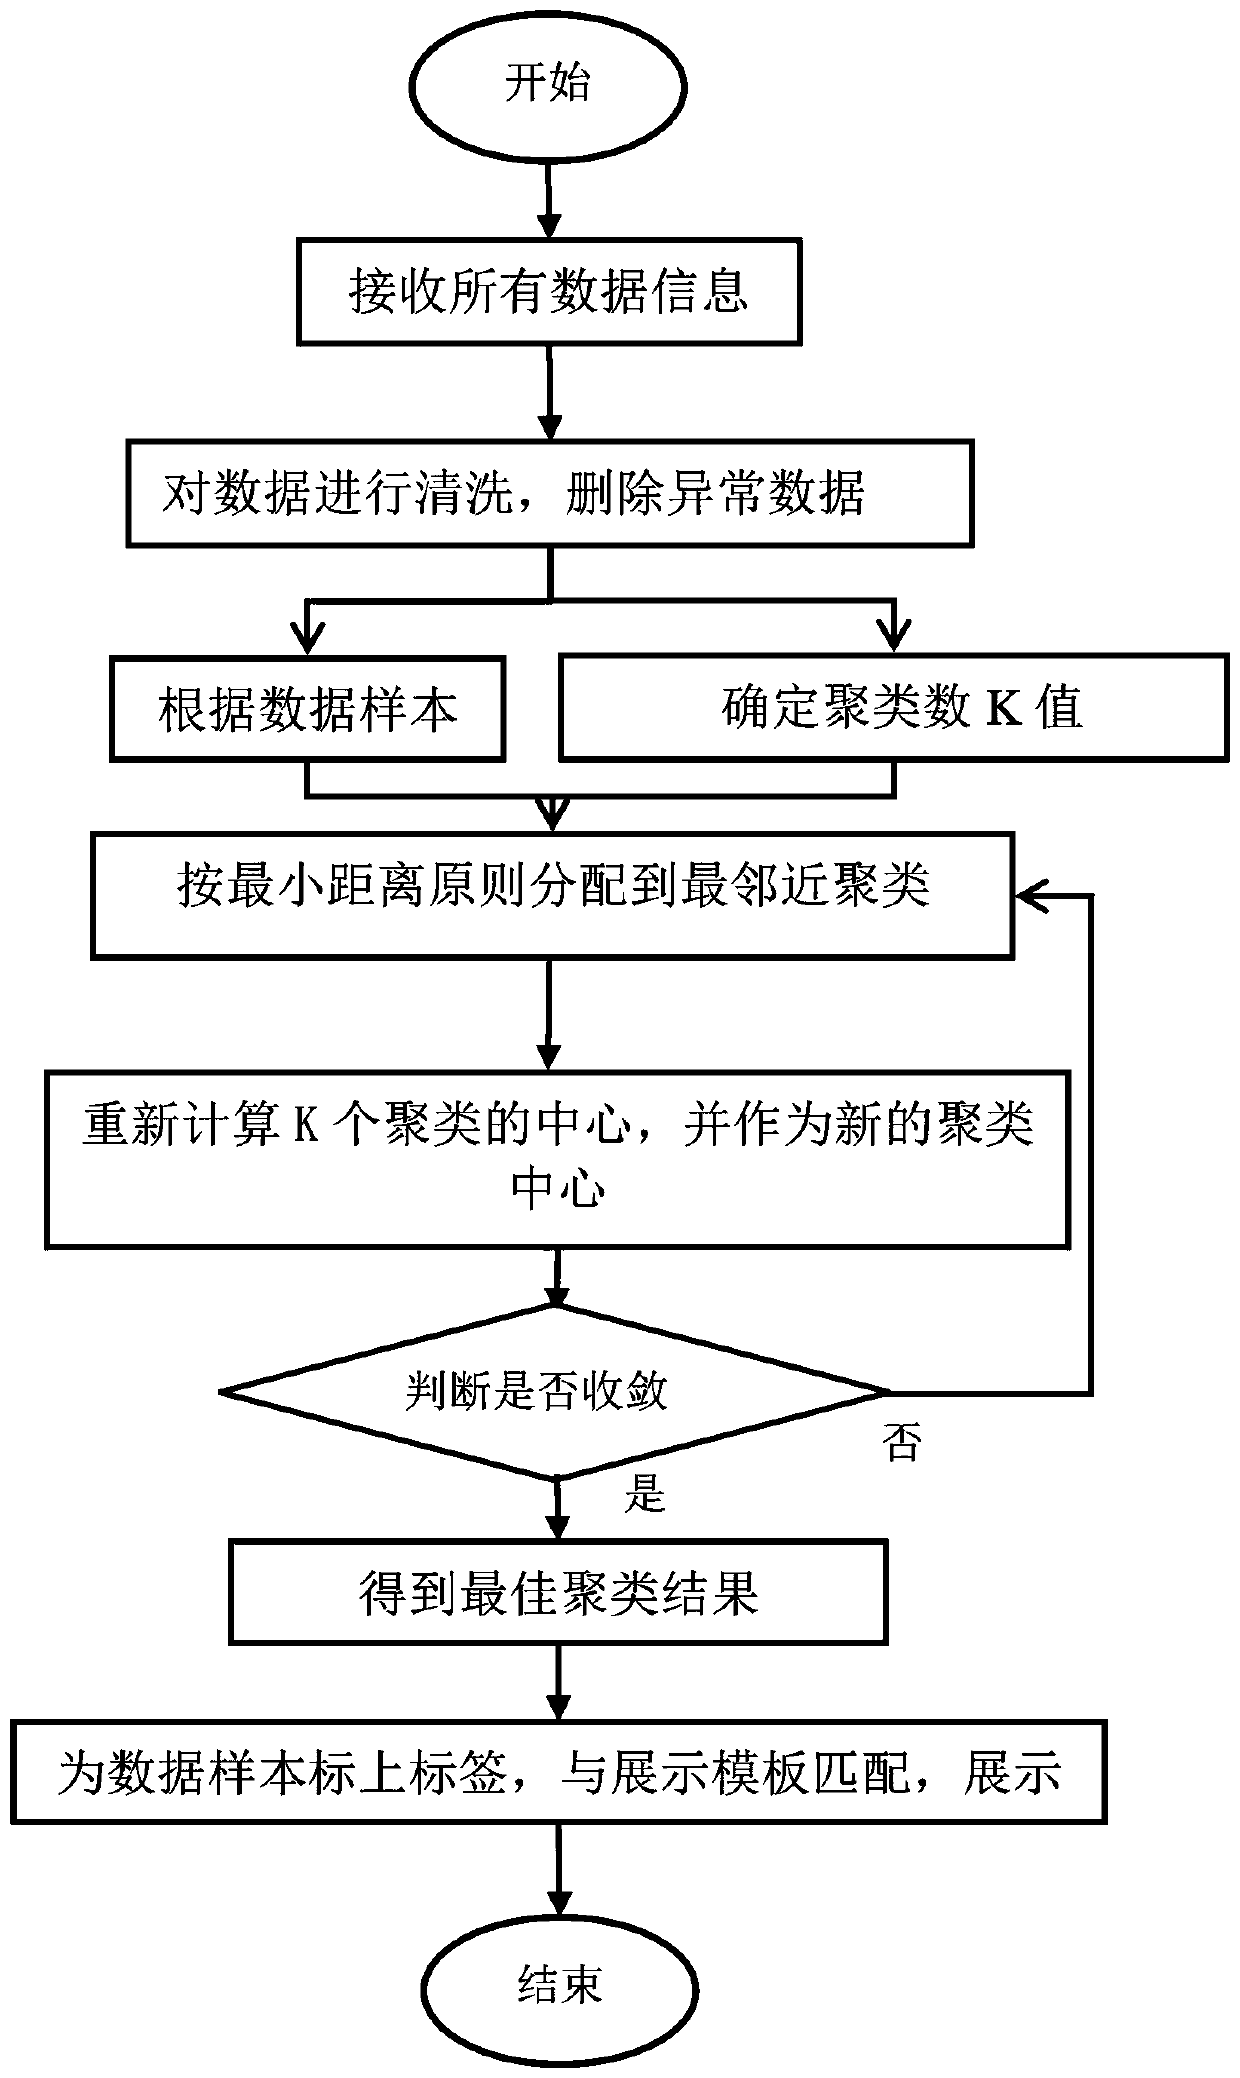 Multi-source data visual analysis and display method and system